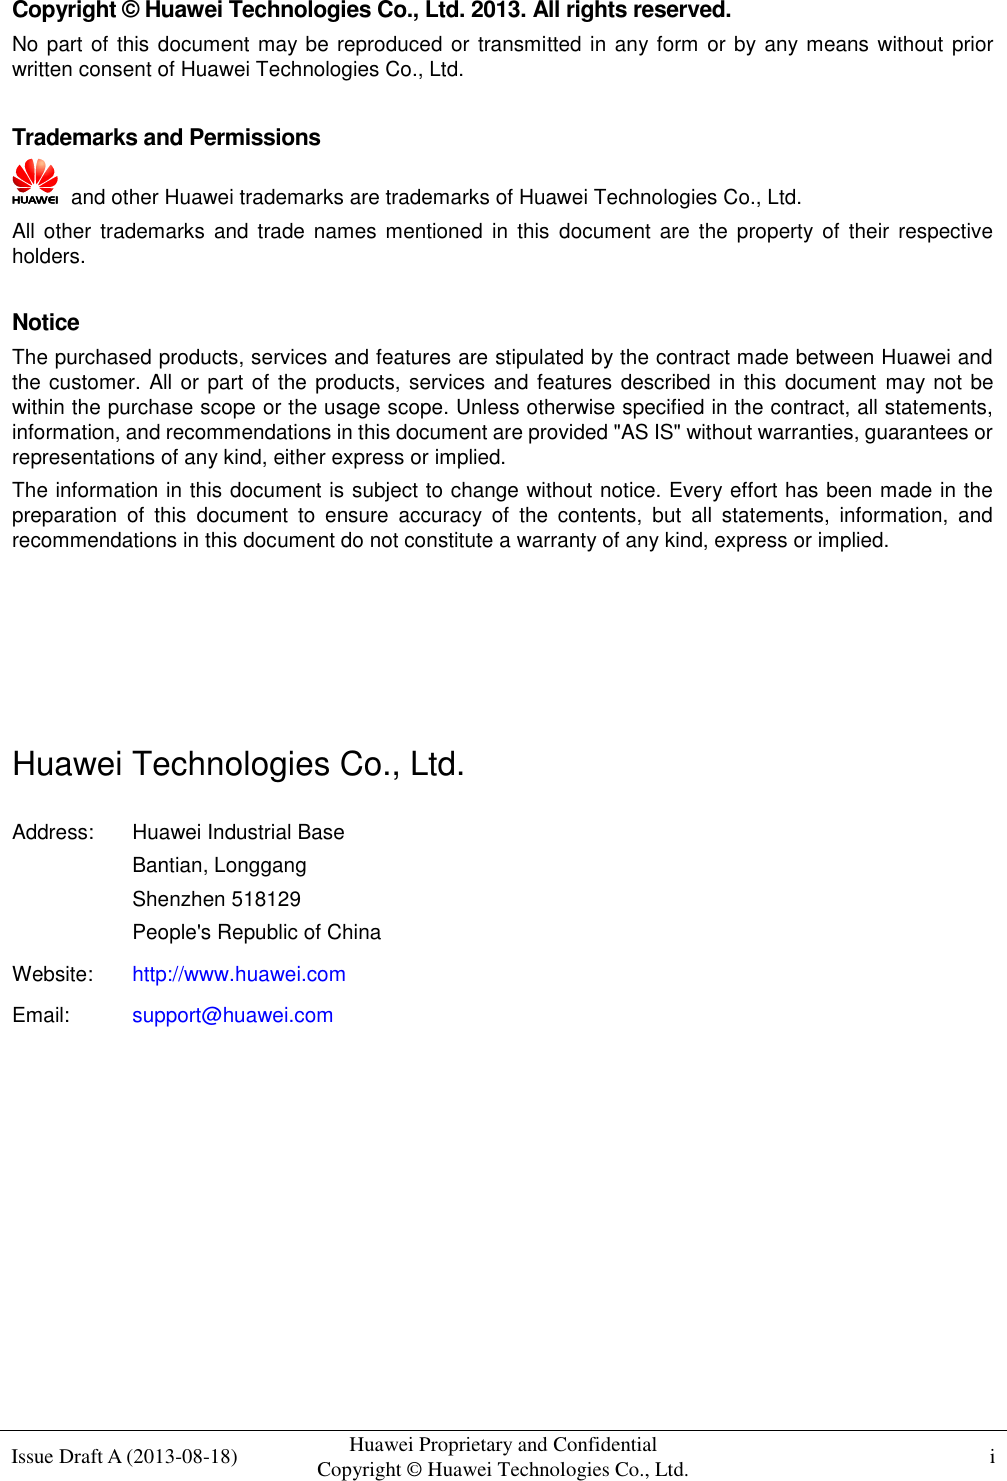  Issue Draft A (2013-08-18) Huawei Proprietary and Confidential                                     Copyright © Huawei Technologies Co., Ltd. i    Copyright © Huawei Technologies Co., Ltd. 2013. All rights reserved. No part of this document may be reproduced or transmitted in any form or by any means without prior written consent of Huawei Technologies Co., Ltd.  Trademarks and Permissions   and other Huawei trademarks are trademarks of Huawei Technologies Co., Ltd. All other trademarks and  trade  names  mentioned  in  this  document are  the  property  of  their respective holders.  Notice The purchased products, services and features are stipulated by the contract made between Huawei and the customer.  All or part of the products, services  and features described in this document may not be within the purchase scope or the usage scope. Unless otherwise specified in the contract, all statements, information, and recommendations in this document are provided &quot;AS IS&quot; without warranties, guarantees or representations of any kind, either express or implied. The information in this document is subject to change without notice. Every effort has been made in the preparation  of  this  document  to  ensure  accuracy  of  the  contents,  but  all  statements,  information,  and recommendations in this document do not constitute a warranty of any kind, express or implied.     Huawei Technologies Co., Ltd. Address: Huawei Industrial Base Bantian, Longgang Shenzhen 518129 People&apos;s Republic of China Website: http://www.huawei.com Email: support@huawei.com          